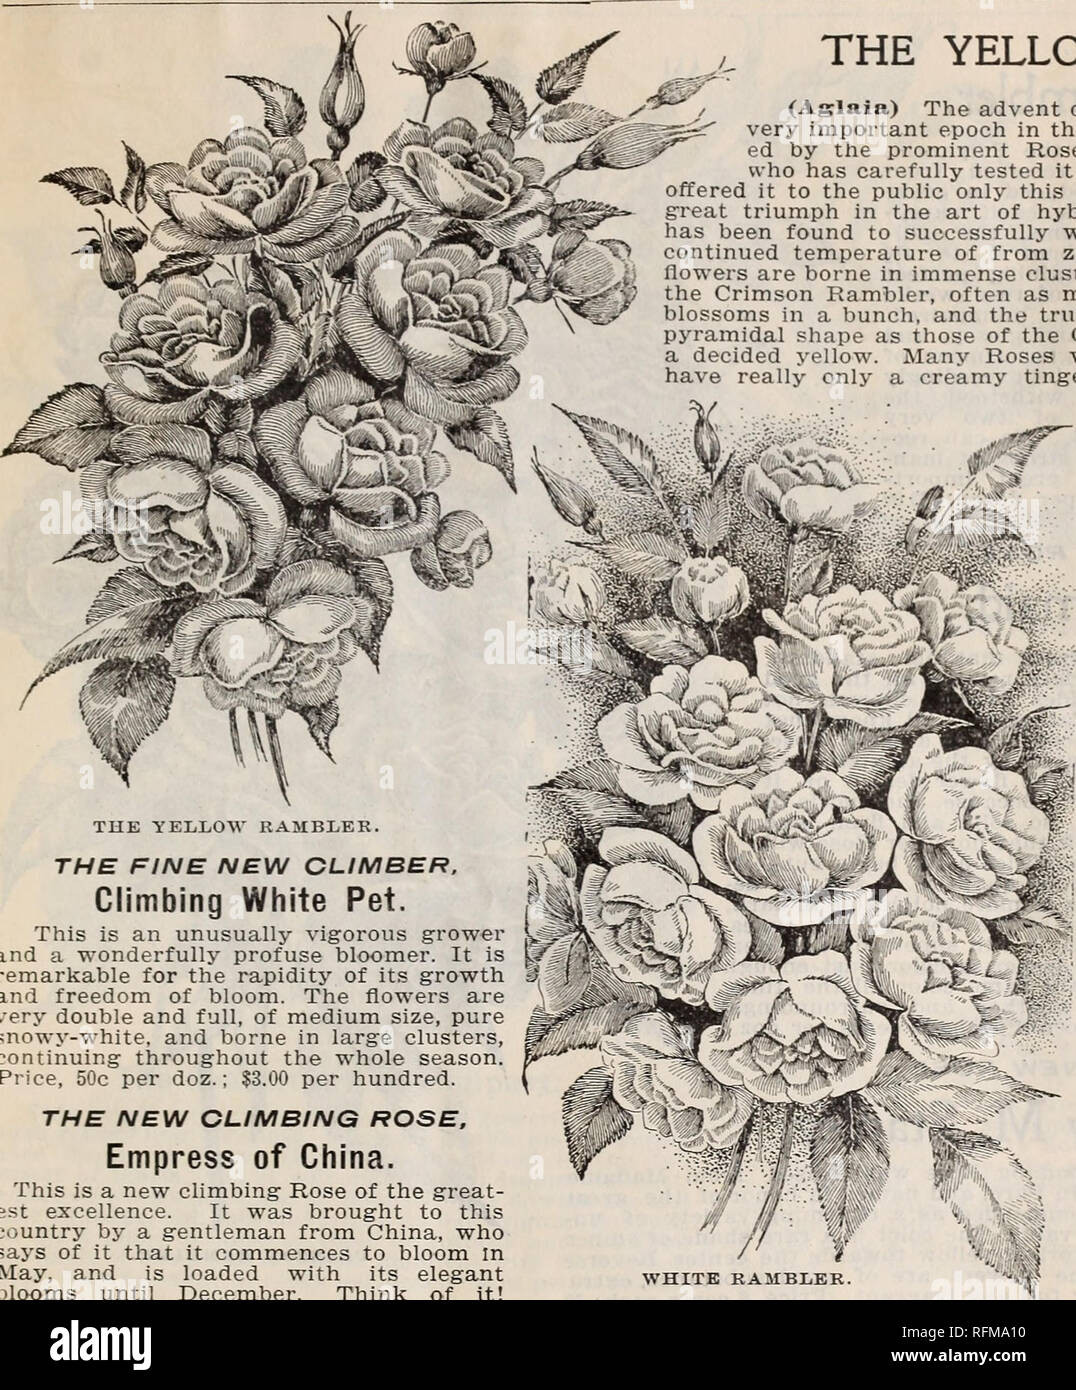 . McGregor Brothers' wholesale price list of plants for florists for spring, 1899. Nurseries (Horticulture) Ohio Springfield Catalogs; Plants, Ornamental Catalogs; Flowers Catalogs; Bulbs (Plants) Catalogs. / McGregor brothers, wholesale florists, Springfield, ohio. 23. THE YELLOW RAMBLER. (Aglaia) The advent of the Yellow Rambler marks a very important epoch in the Rose world. It was originat- ed by the prominent Rose grower, Mr. Peter Lambert, who has carefully tested it for some eight years, and first offered it to the public only this last season. Its production is a great triumph in the a Stock Photo